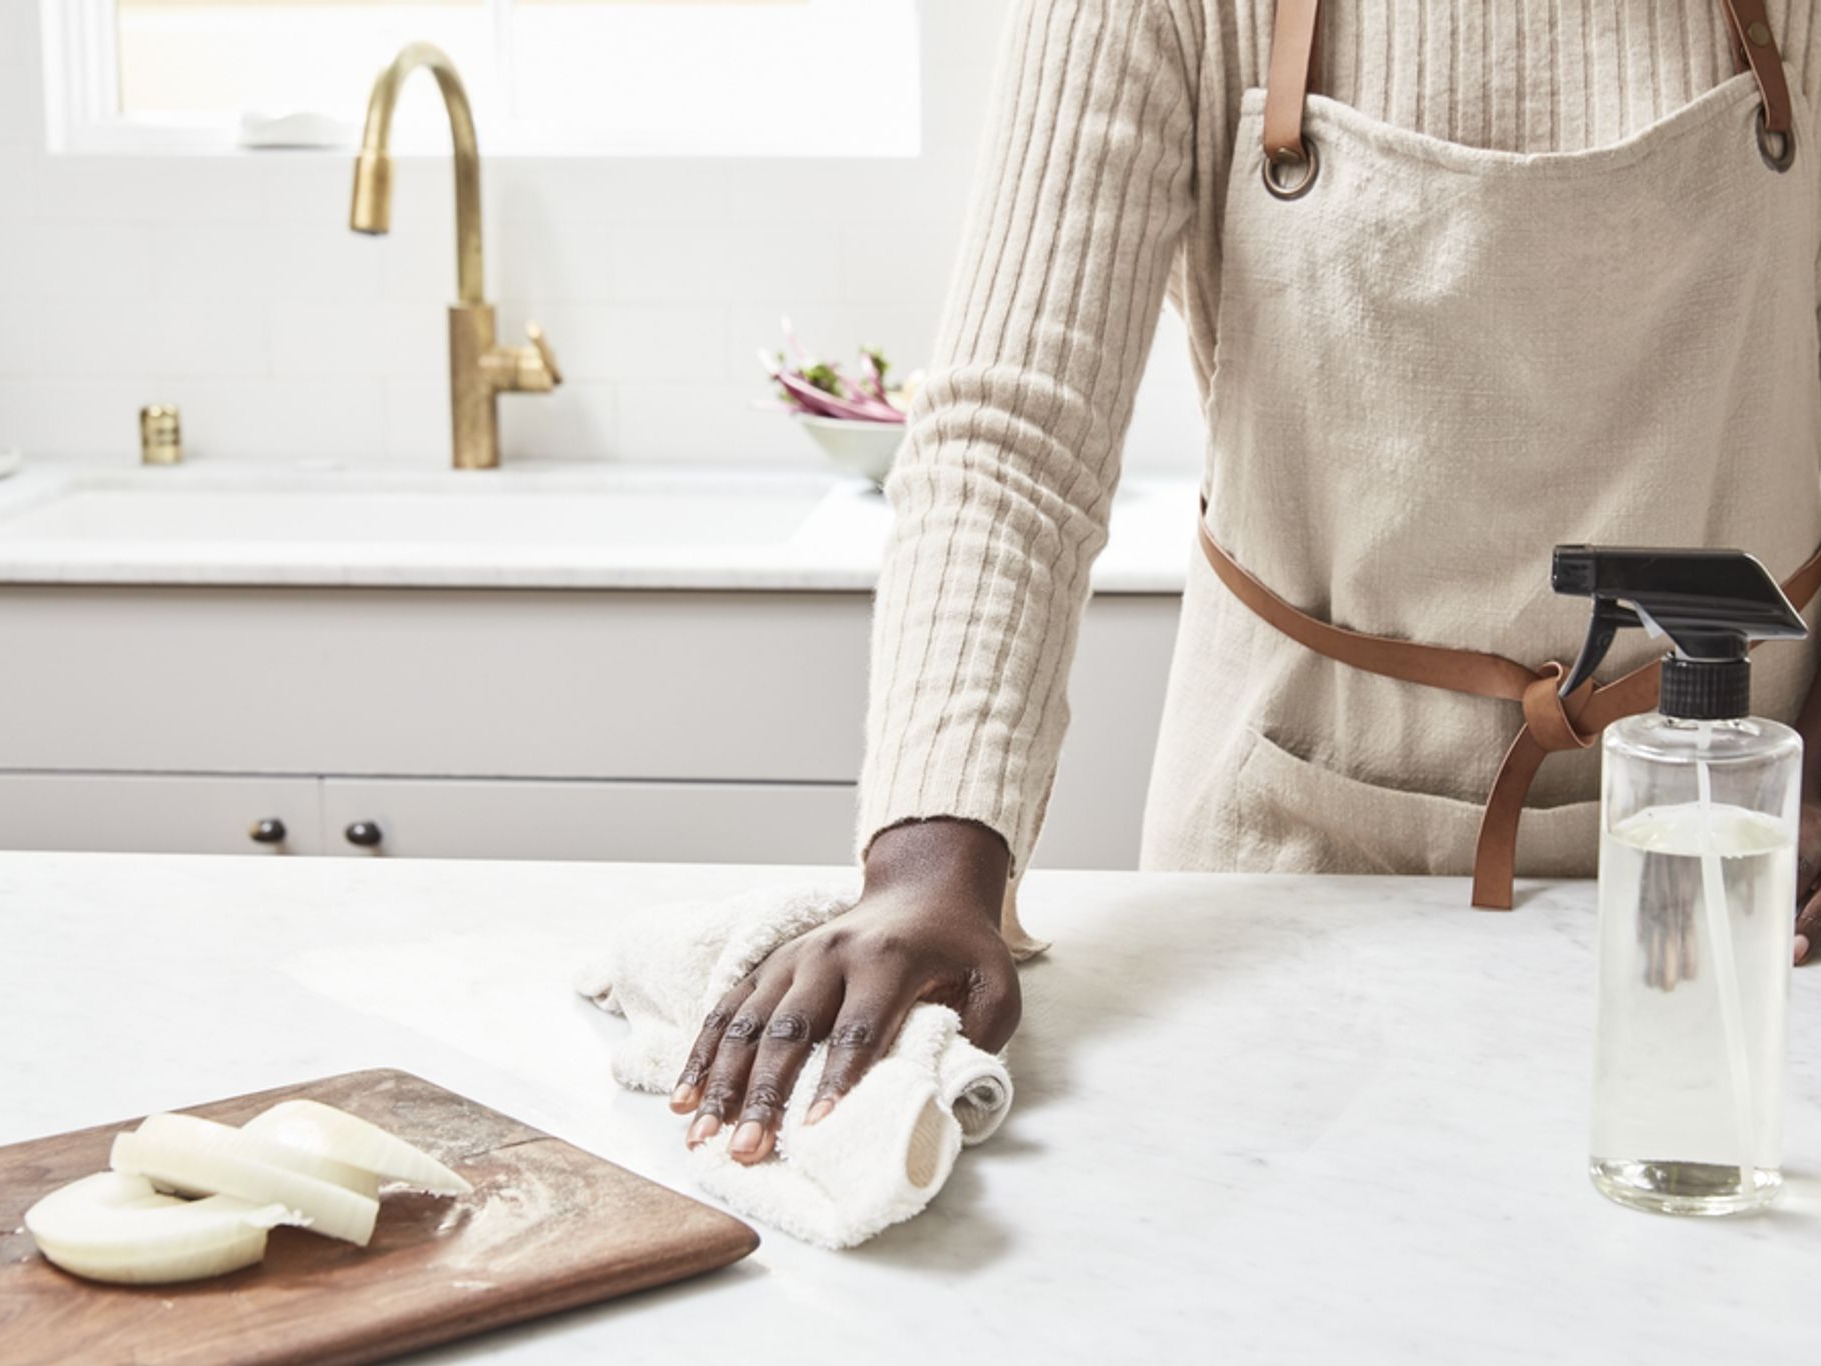 Image of woman wiping down kitchen counter next to cutting board